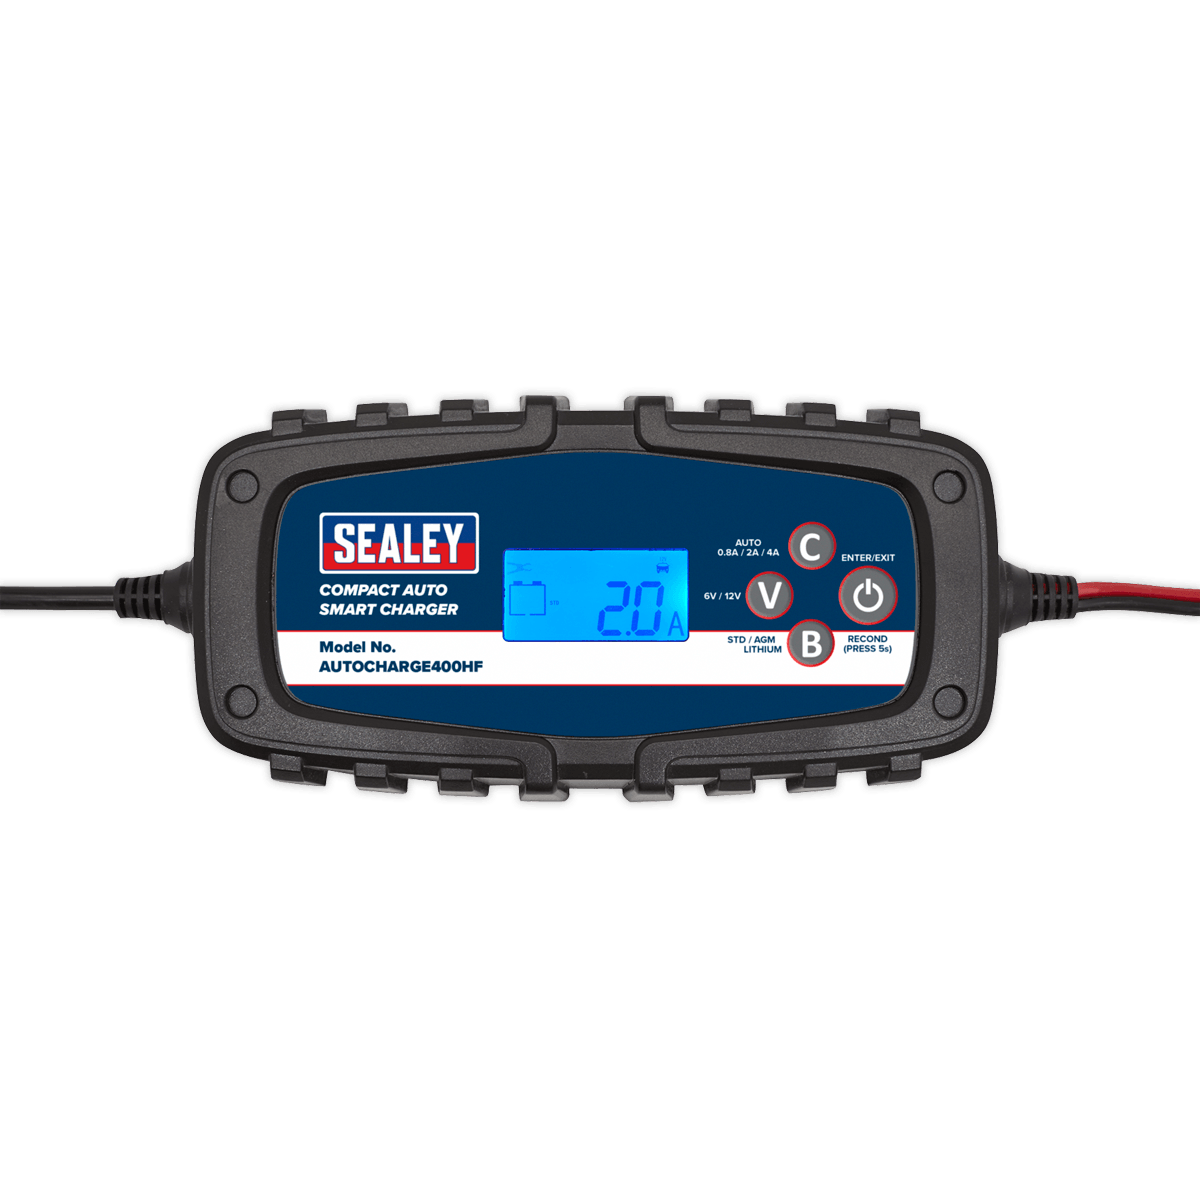 Compact Auto Smart Charger 4A 9-Cycle 6/12V - Lithium - Newmarket Motorcycle Company 